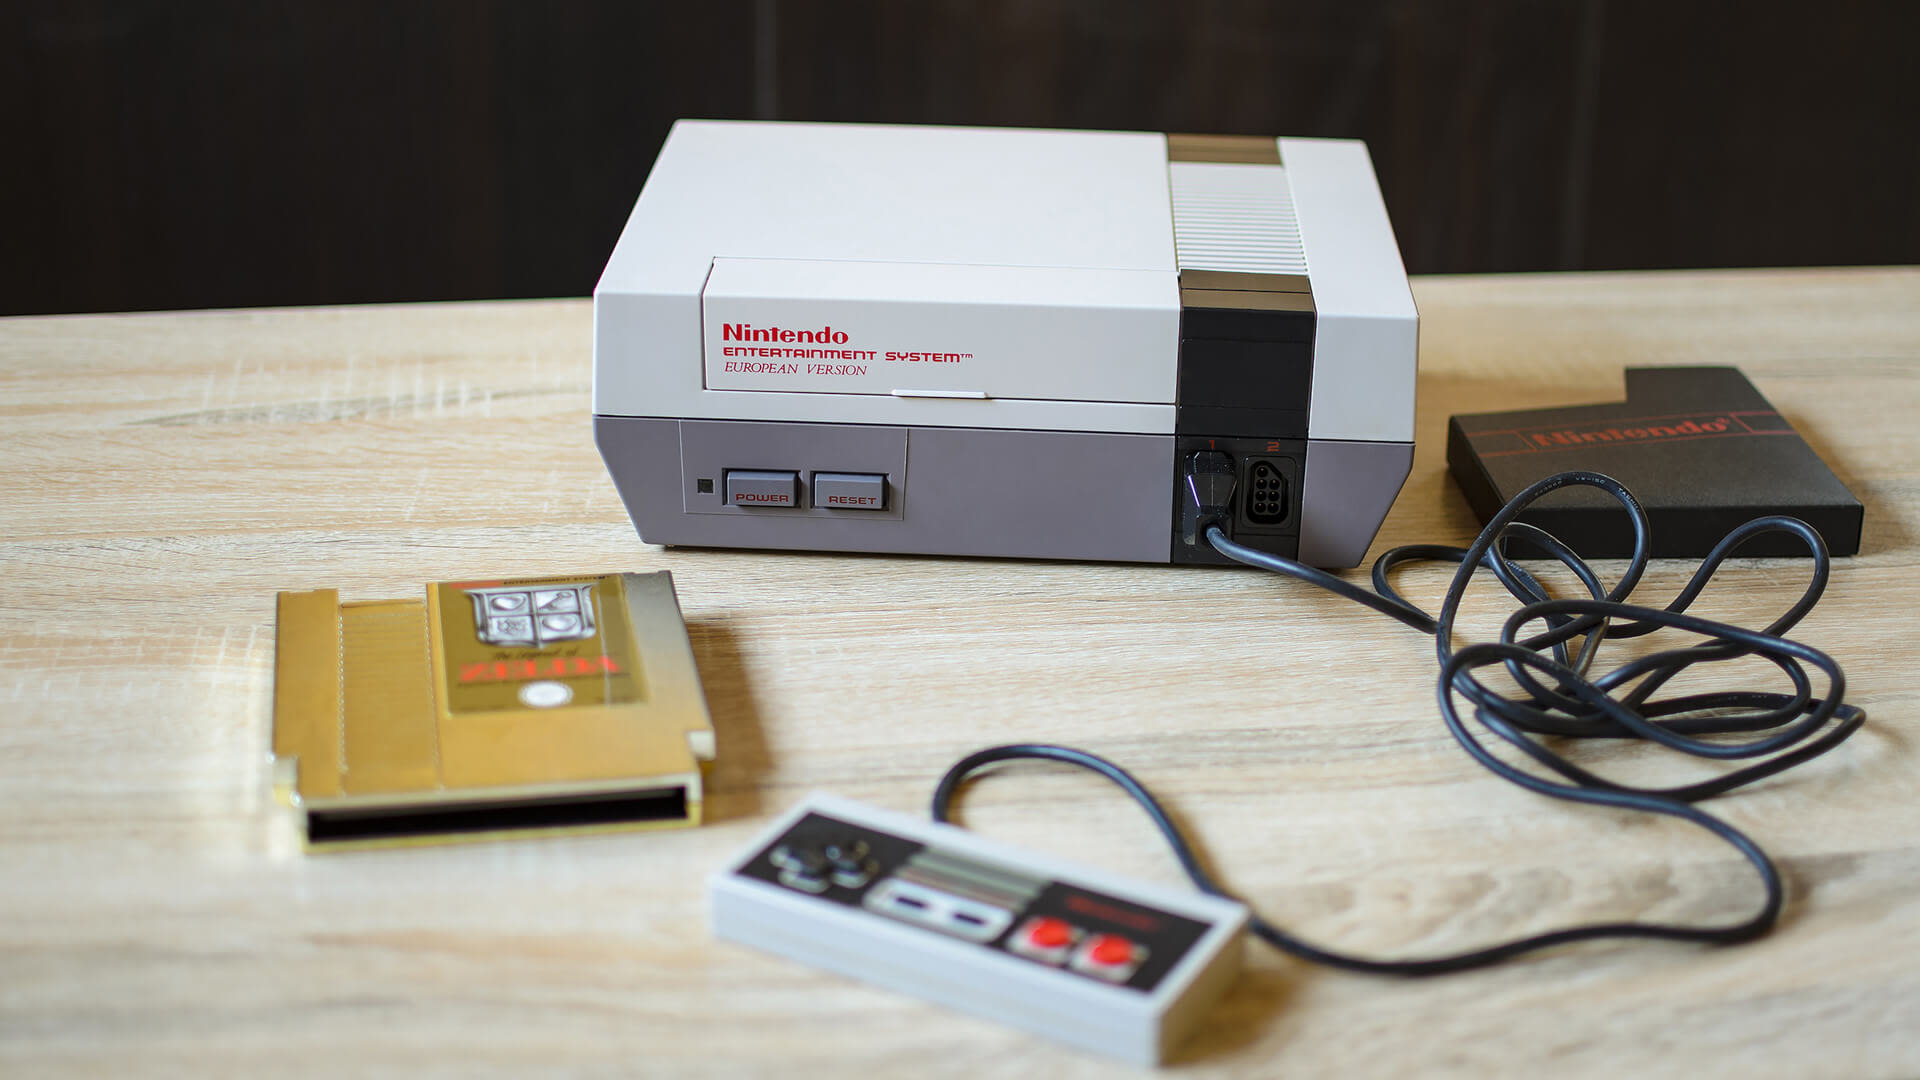 9 Vintage Video Games in Your House That Could Be Worth a Fortune